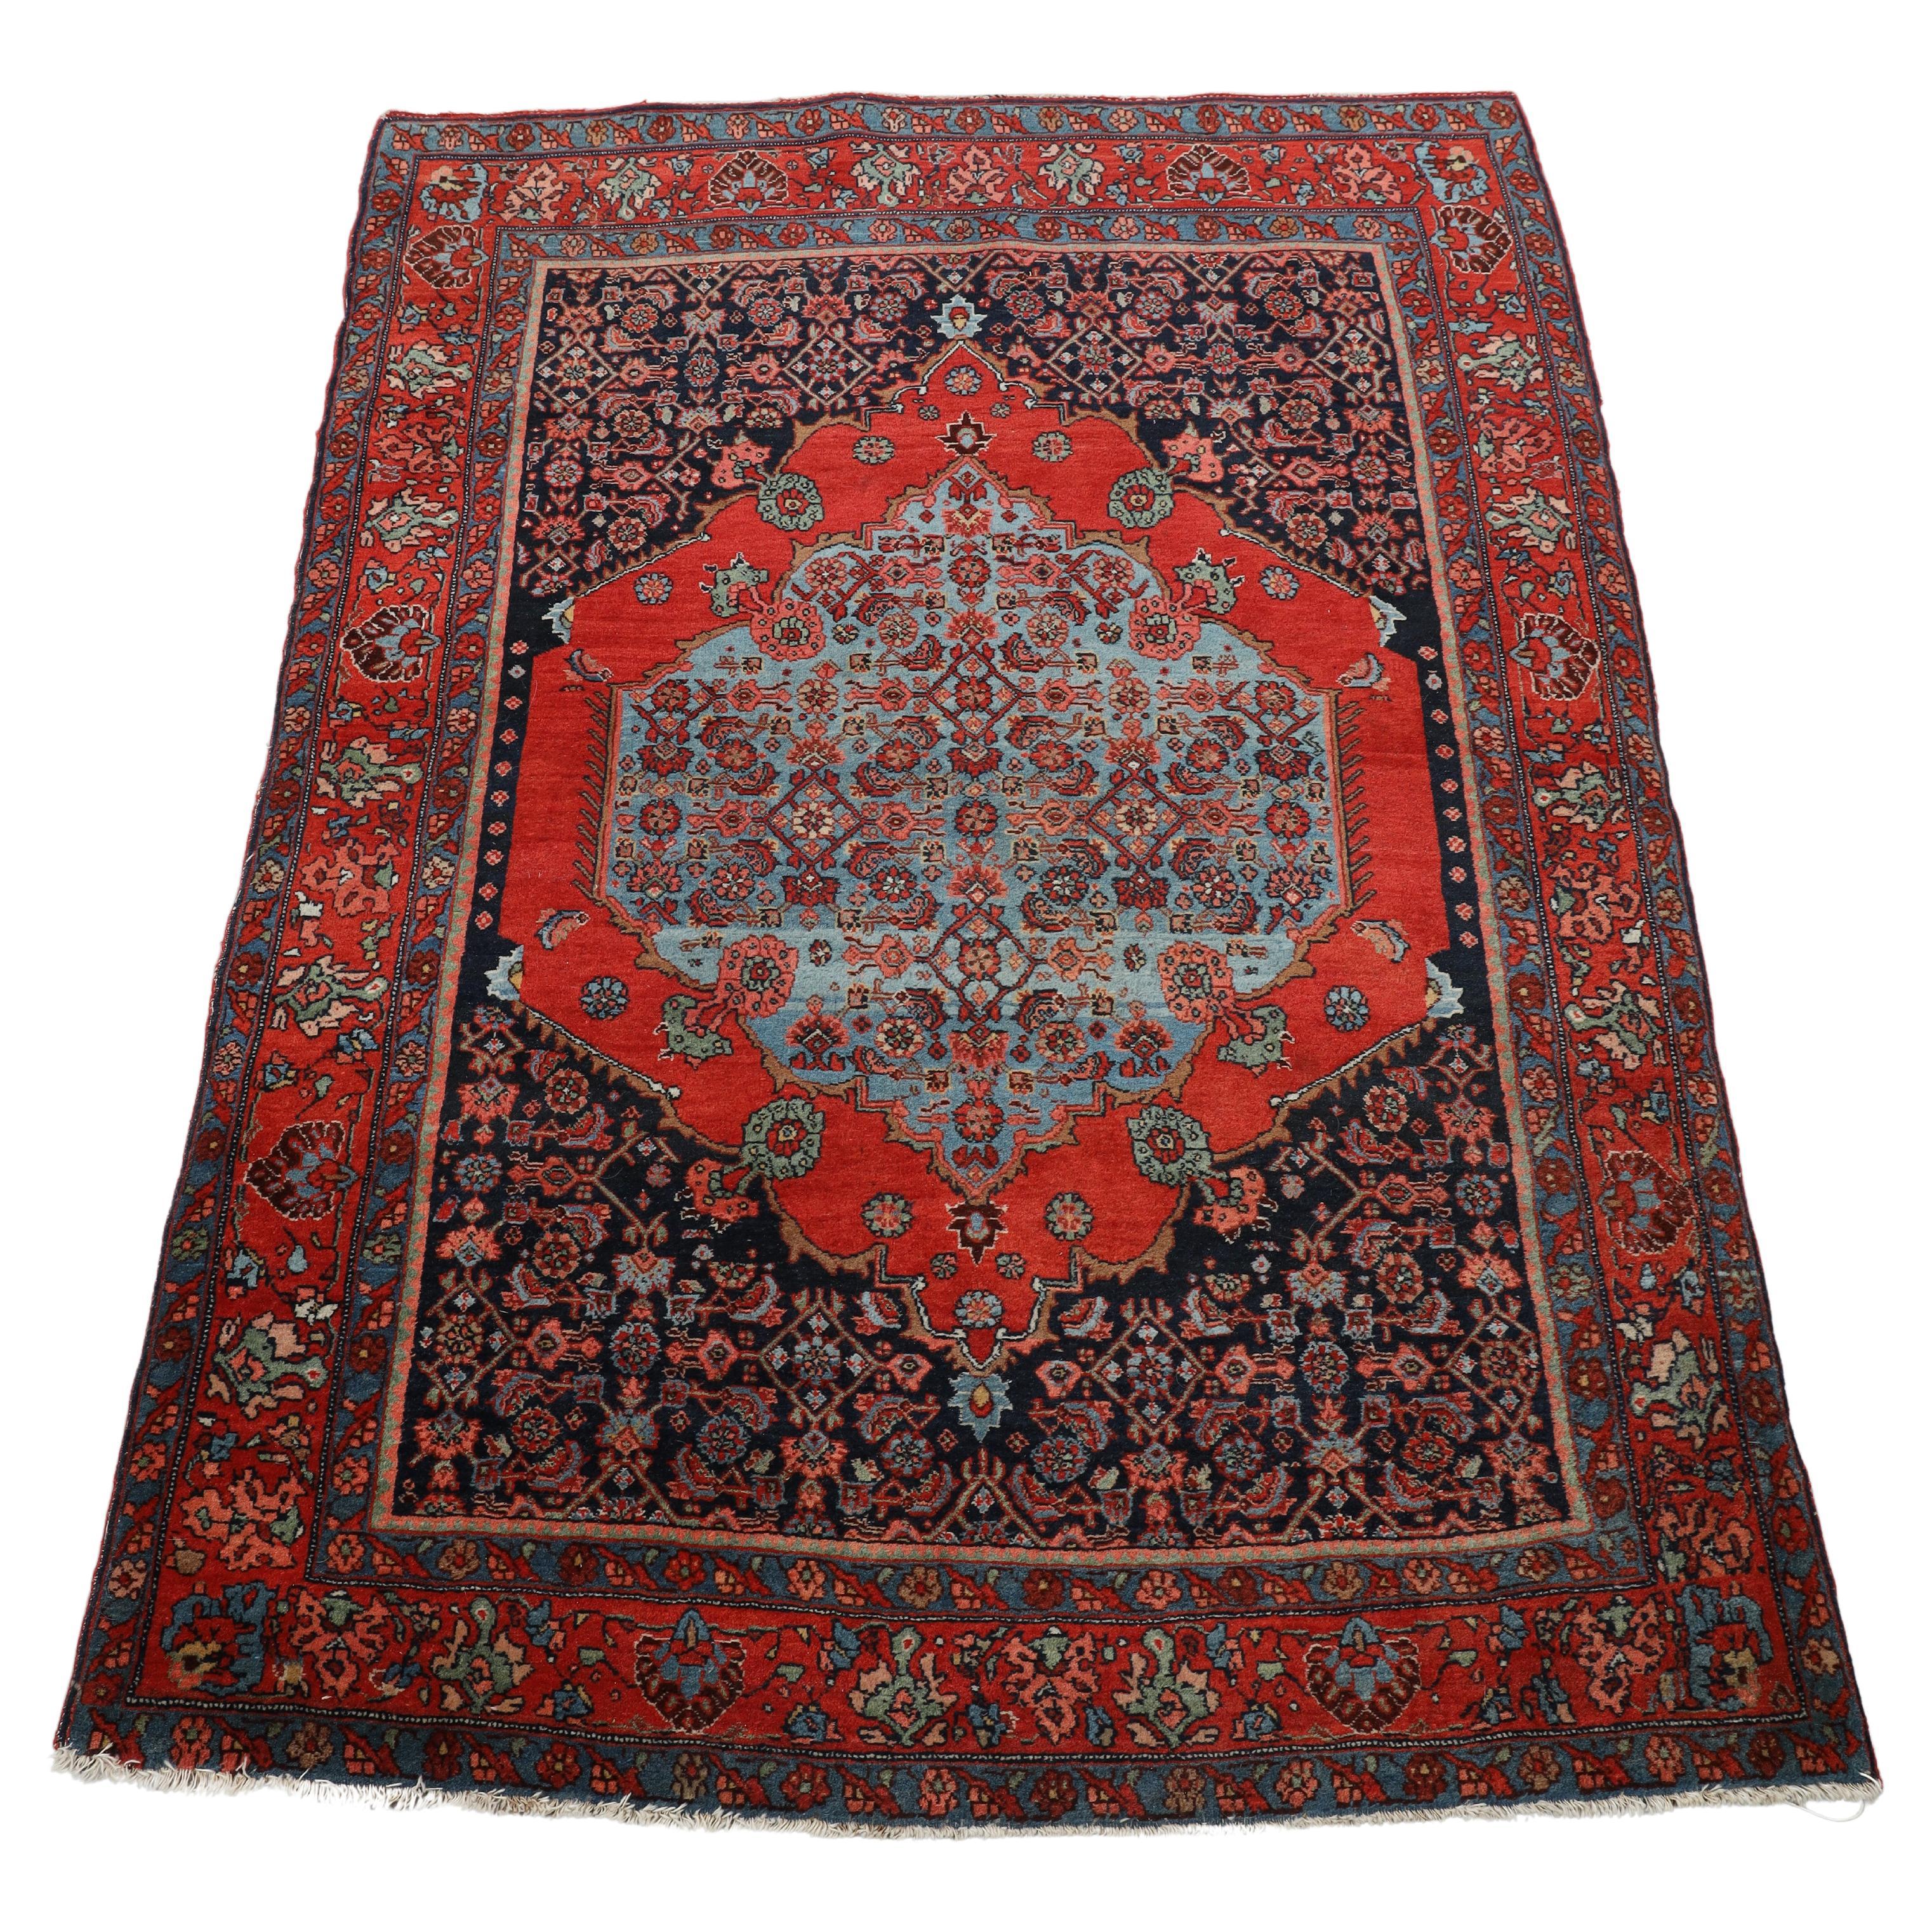 Red Carpet Medallion Hand Woven Wool Area Rug Traditional Floral Rust Carpet